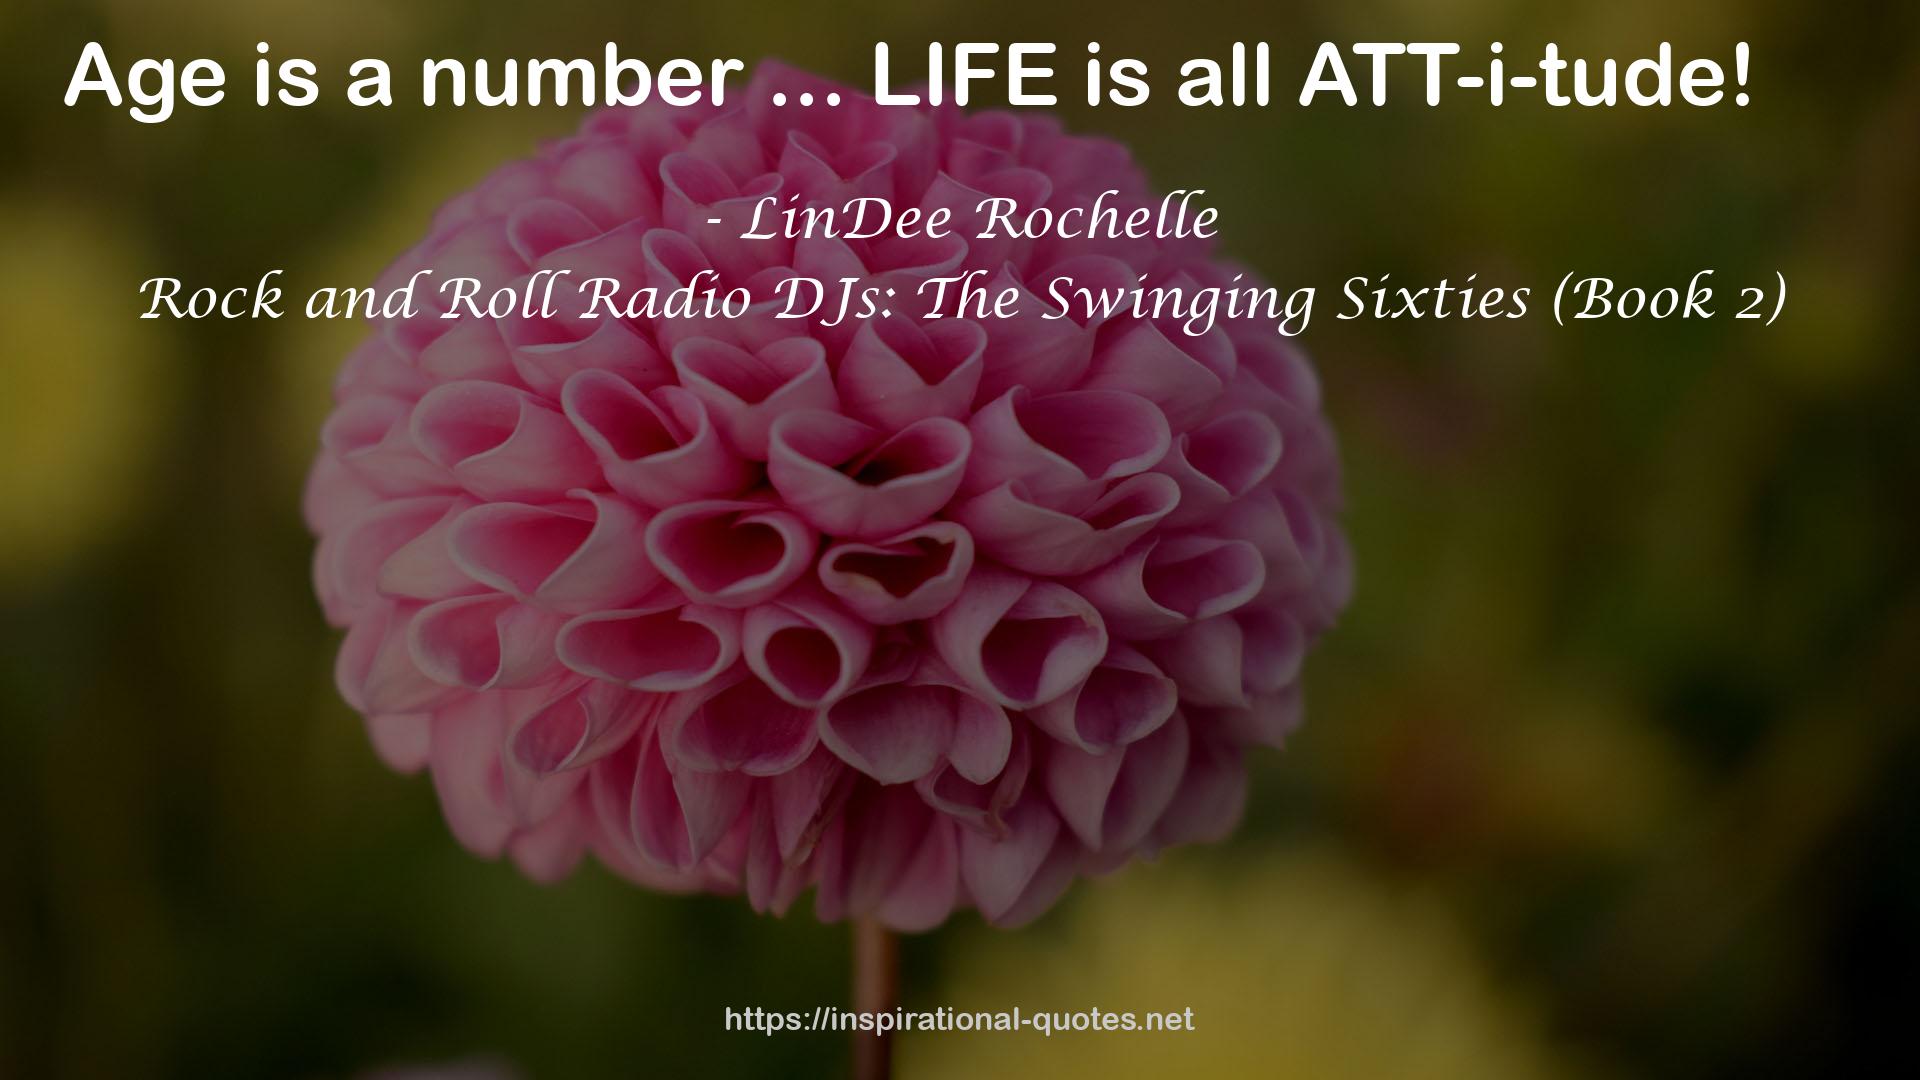 LinDee Rochelle QUOTES